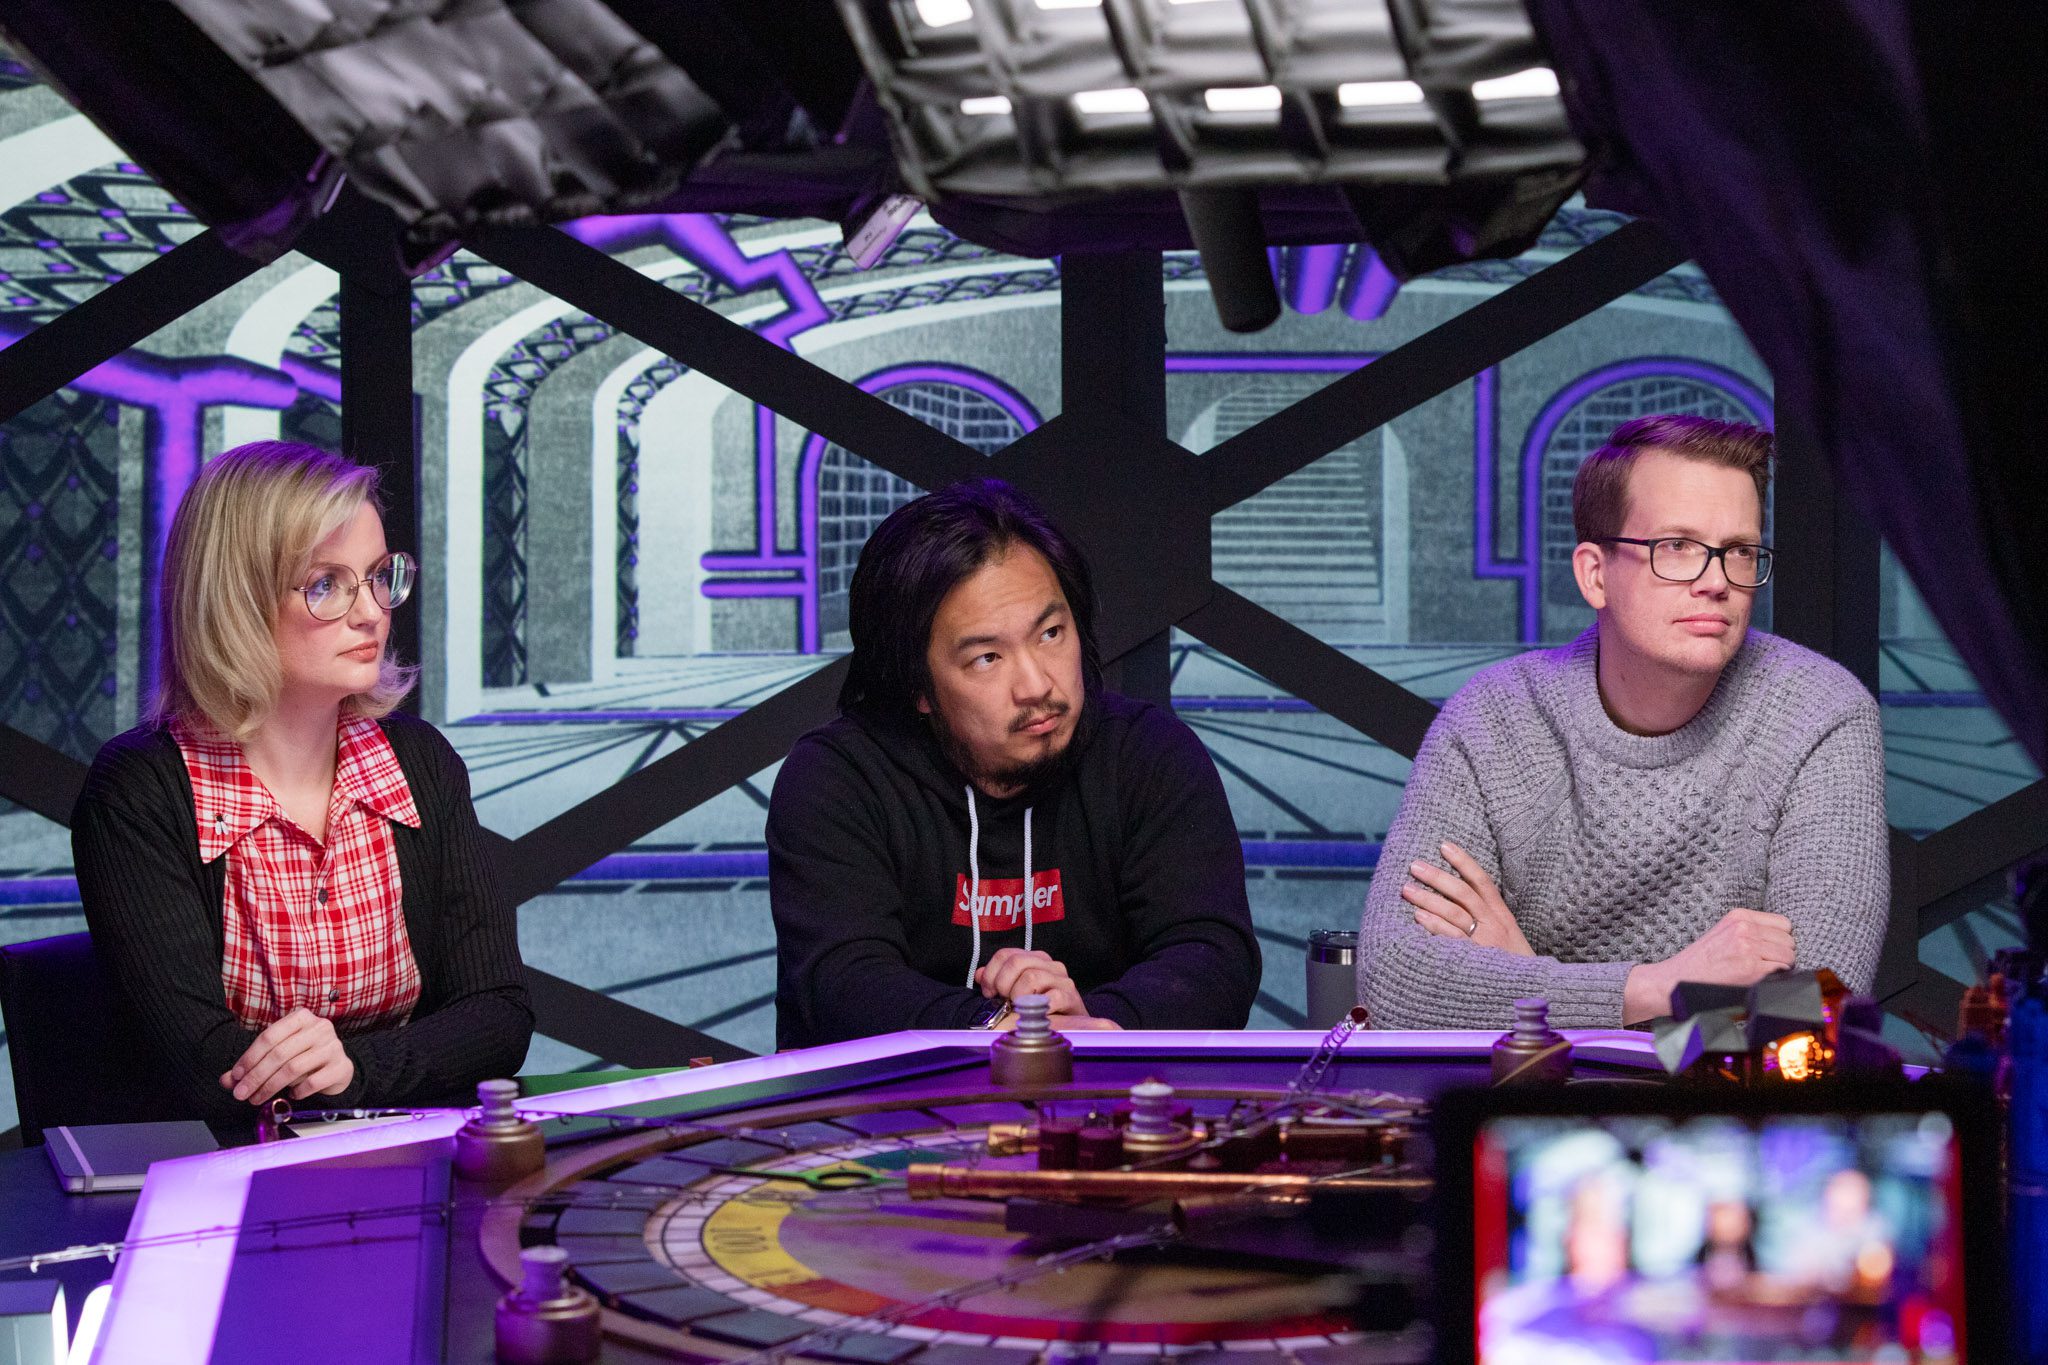 (from left to right) Siobhan Thompson, Freddie Wong, and Hank Green on the set of Dimension 20's Metropolis